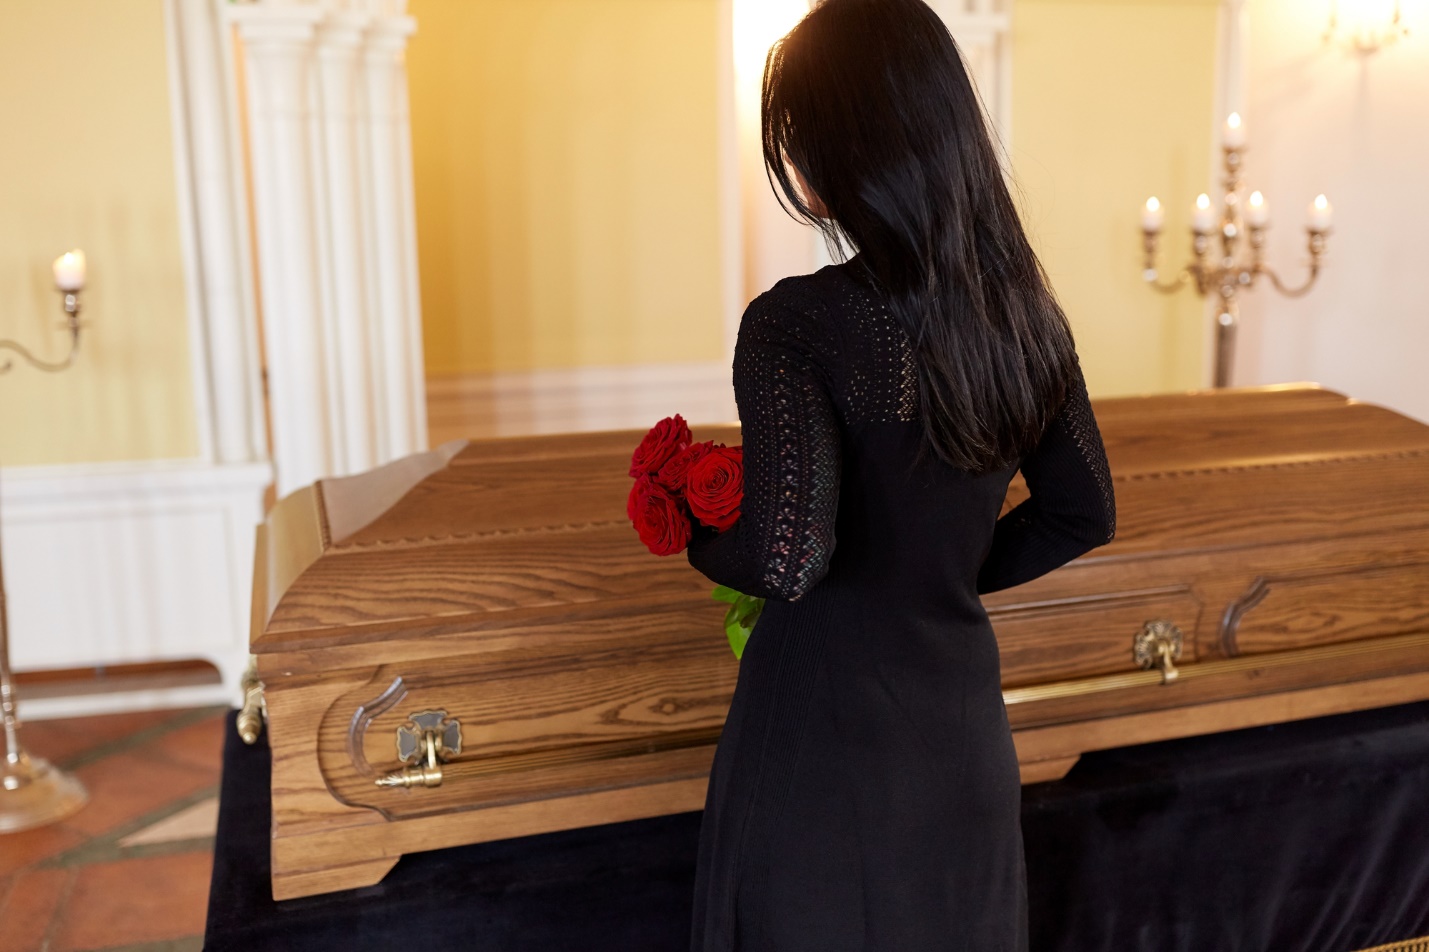 A person holding flowers standing in front of a coffin

Description automatically generated